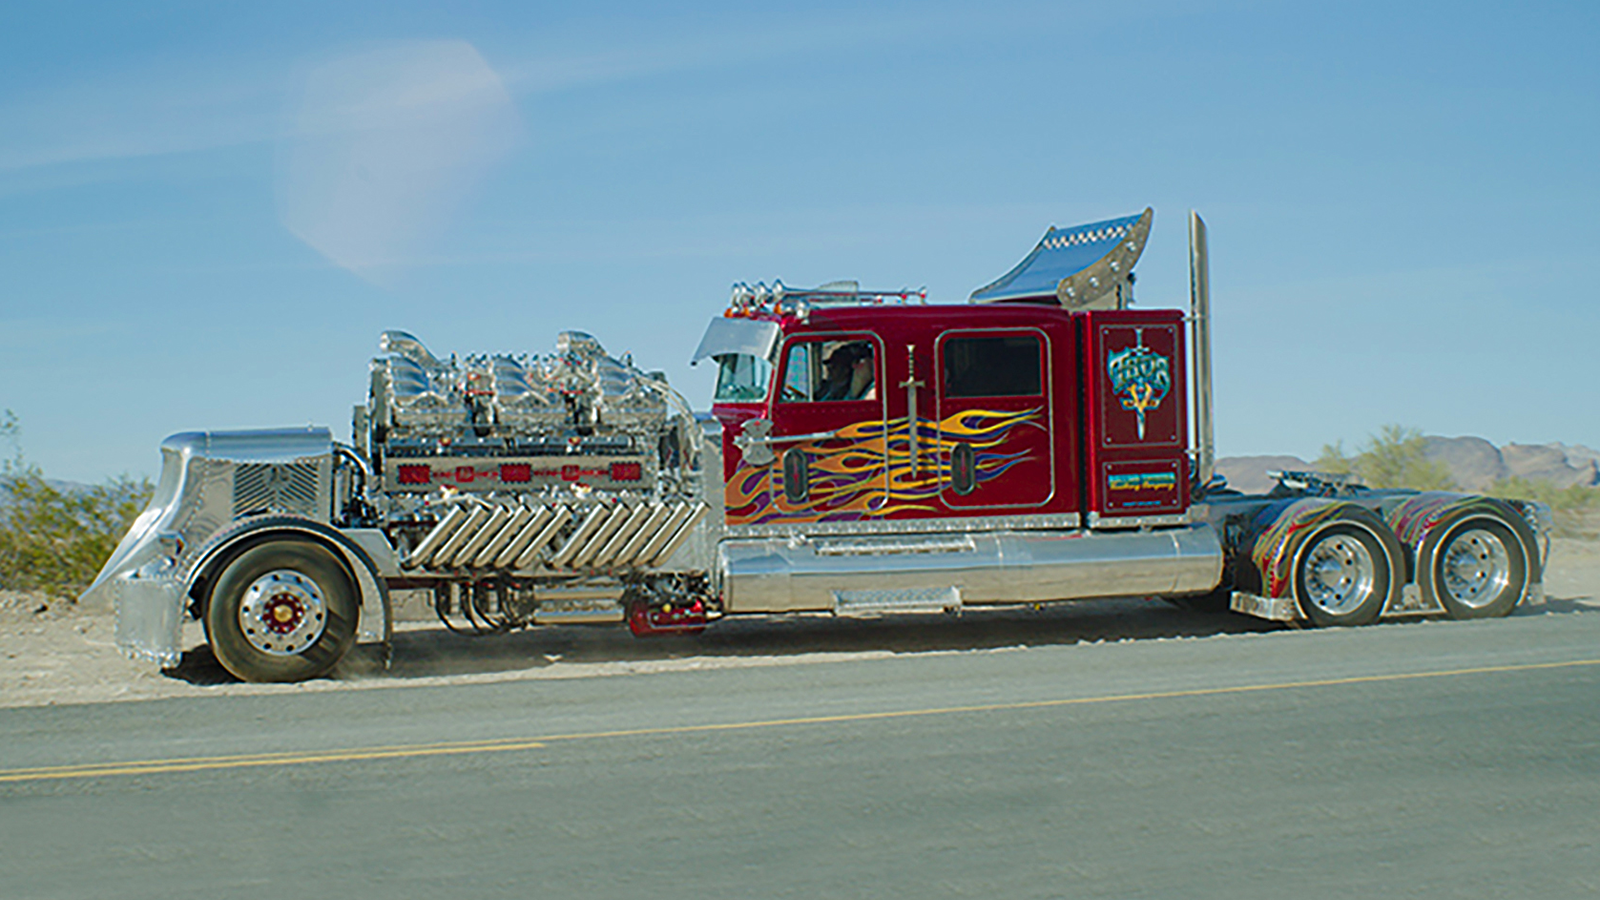 This custom rig just sold for an incredible $13.2m!